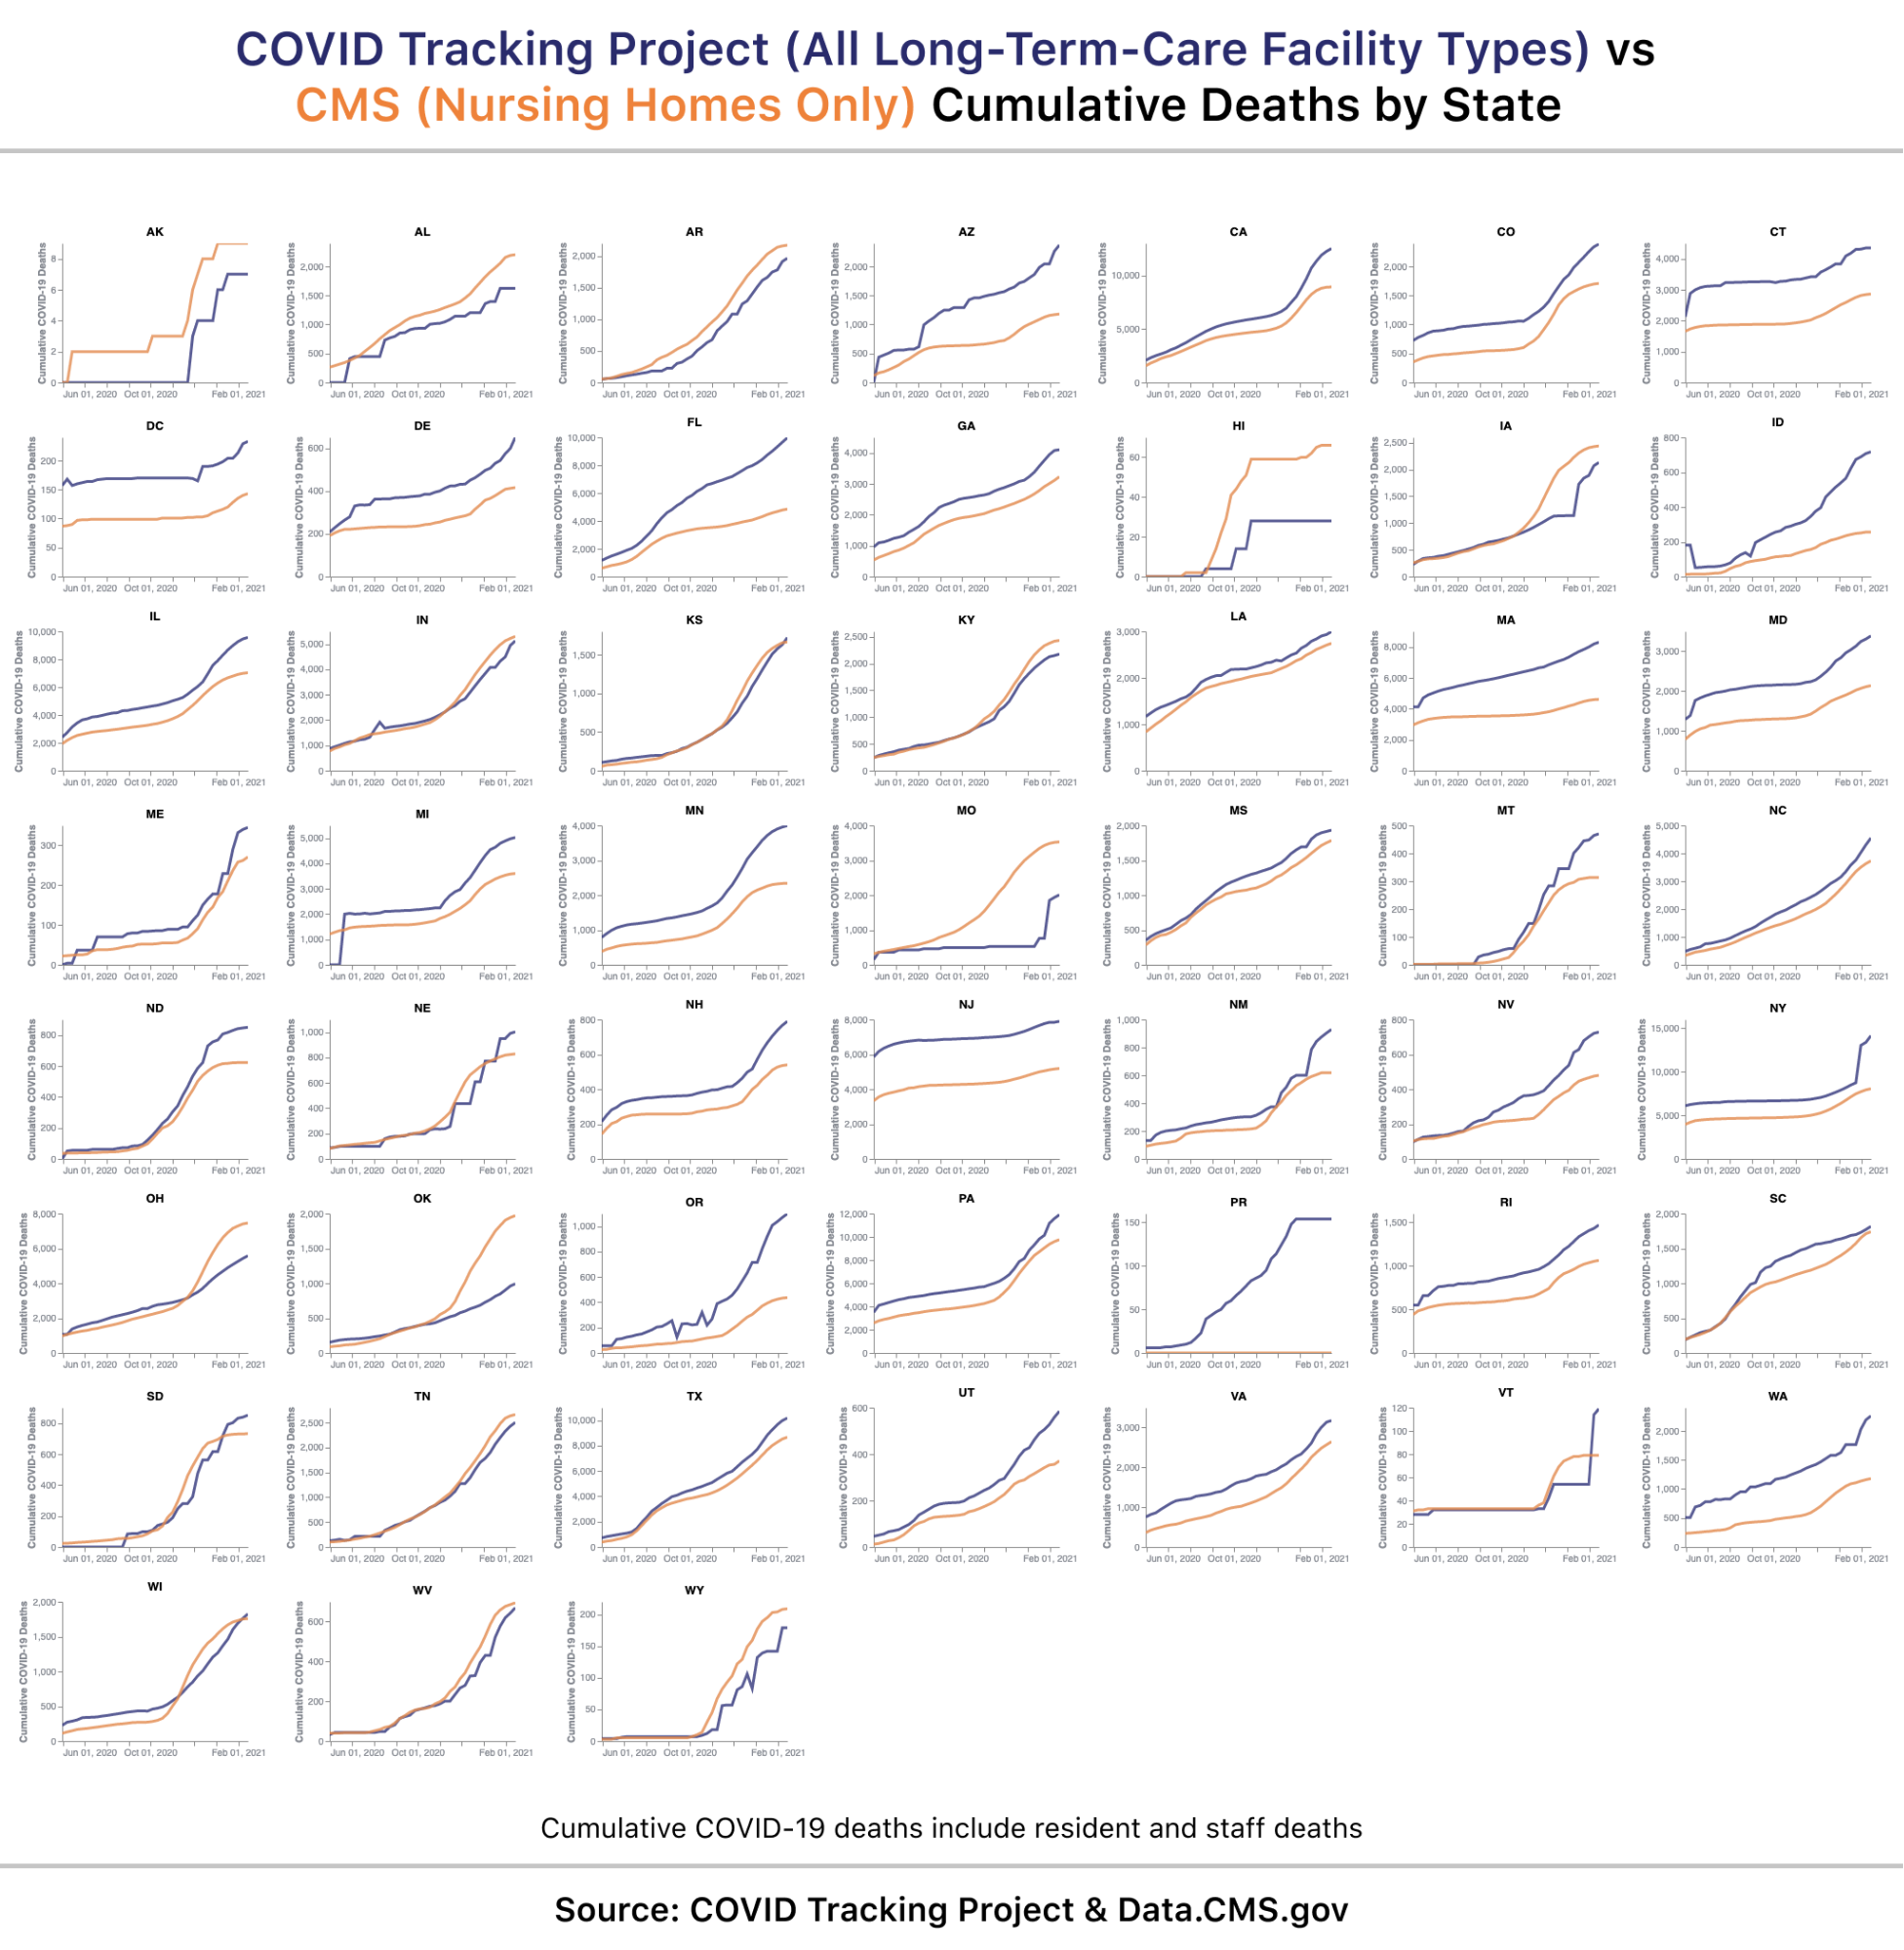 Line charts comparing COVID Tracking Project data to CMS data for 52 states and territories. In many cases, CMS data follows a similar trajectory but is lower than state-collected data.